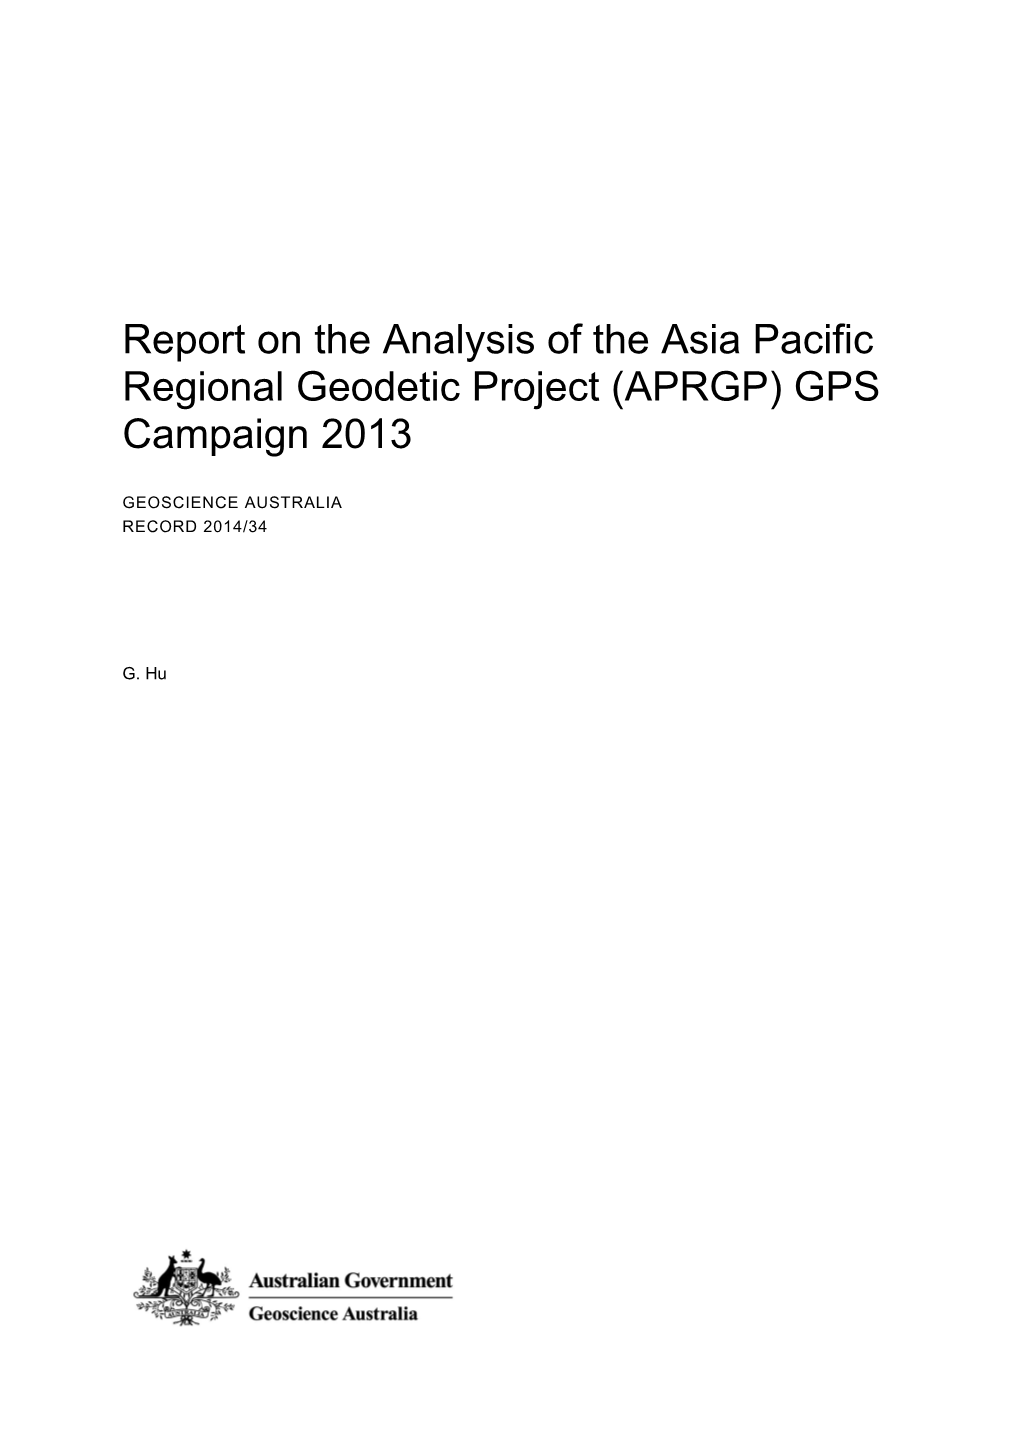 Report on the Analysis of the Asia Pacific Regional Geodetic Project (APRGP) GPS Campaign 2013